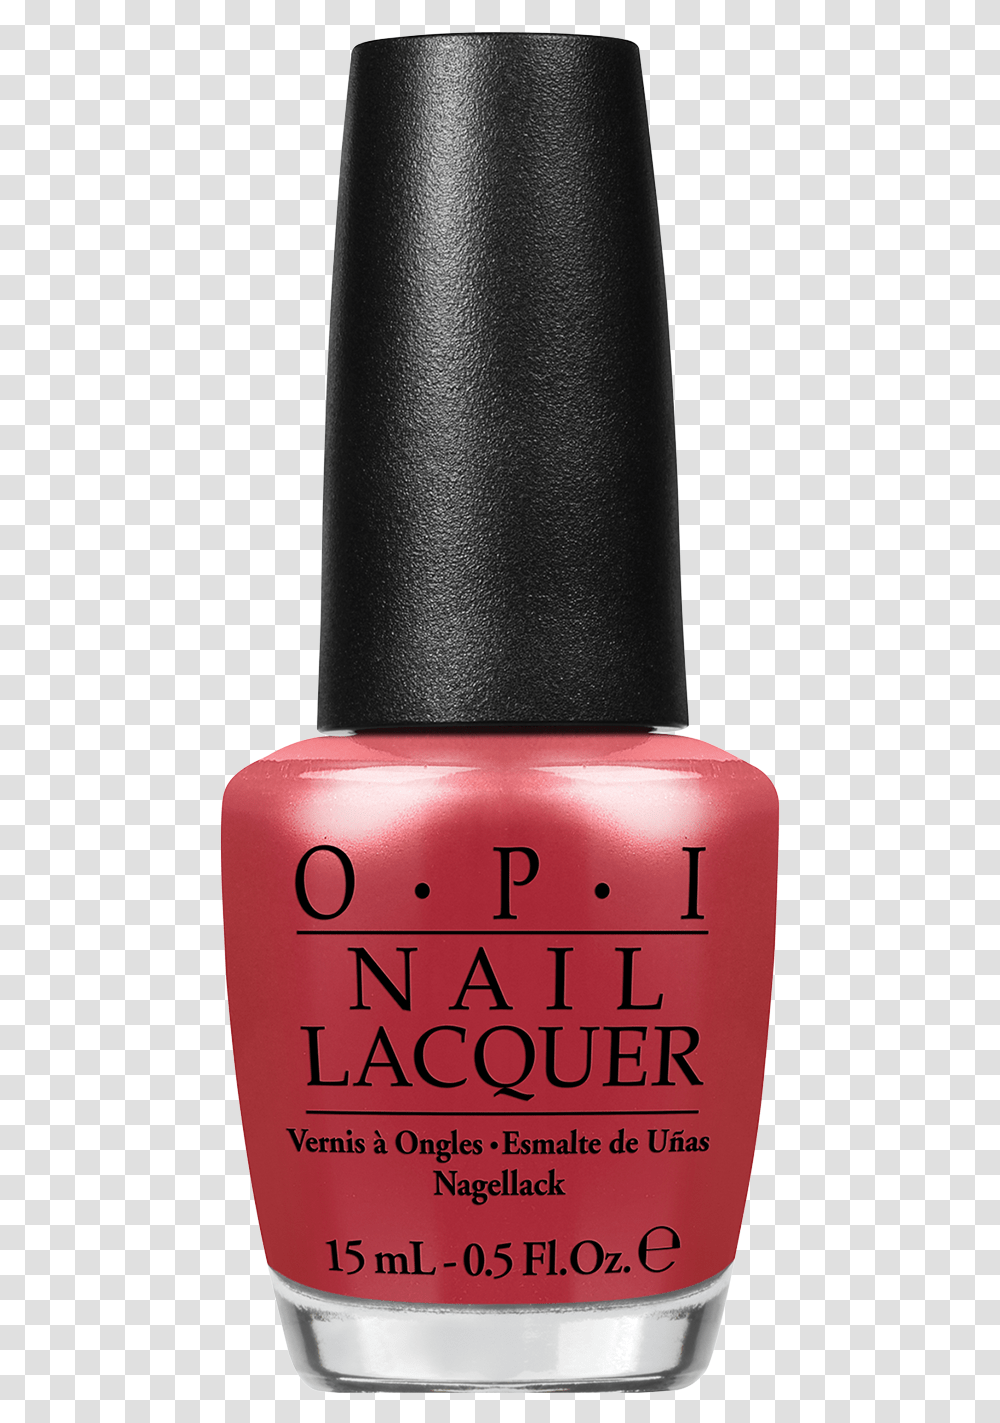 Go With The Lava Flow H69 Bottle Of Nail Polish, Cosmetics, Lipstick, Milk, Beverage Transparent Png